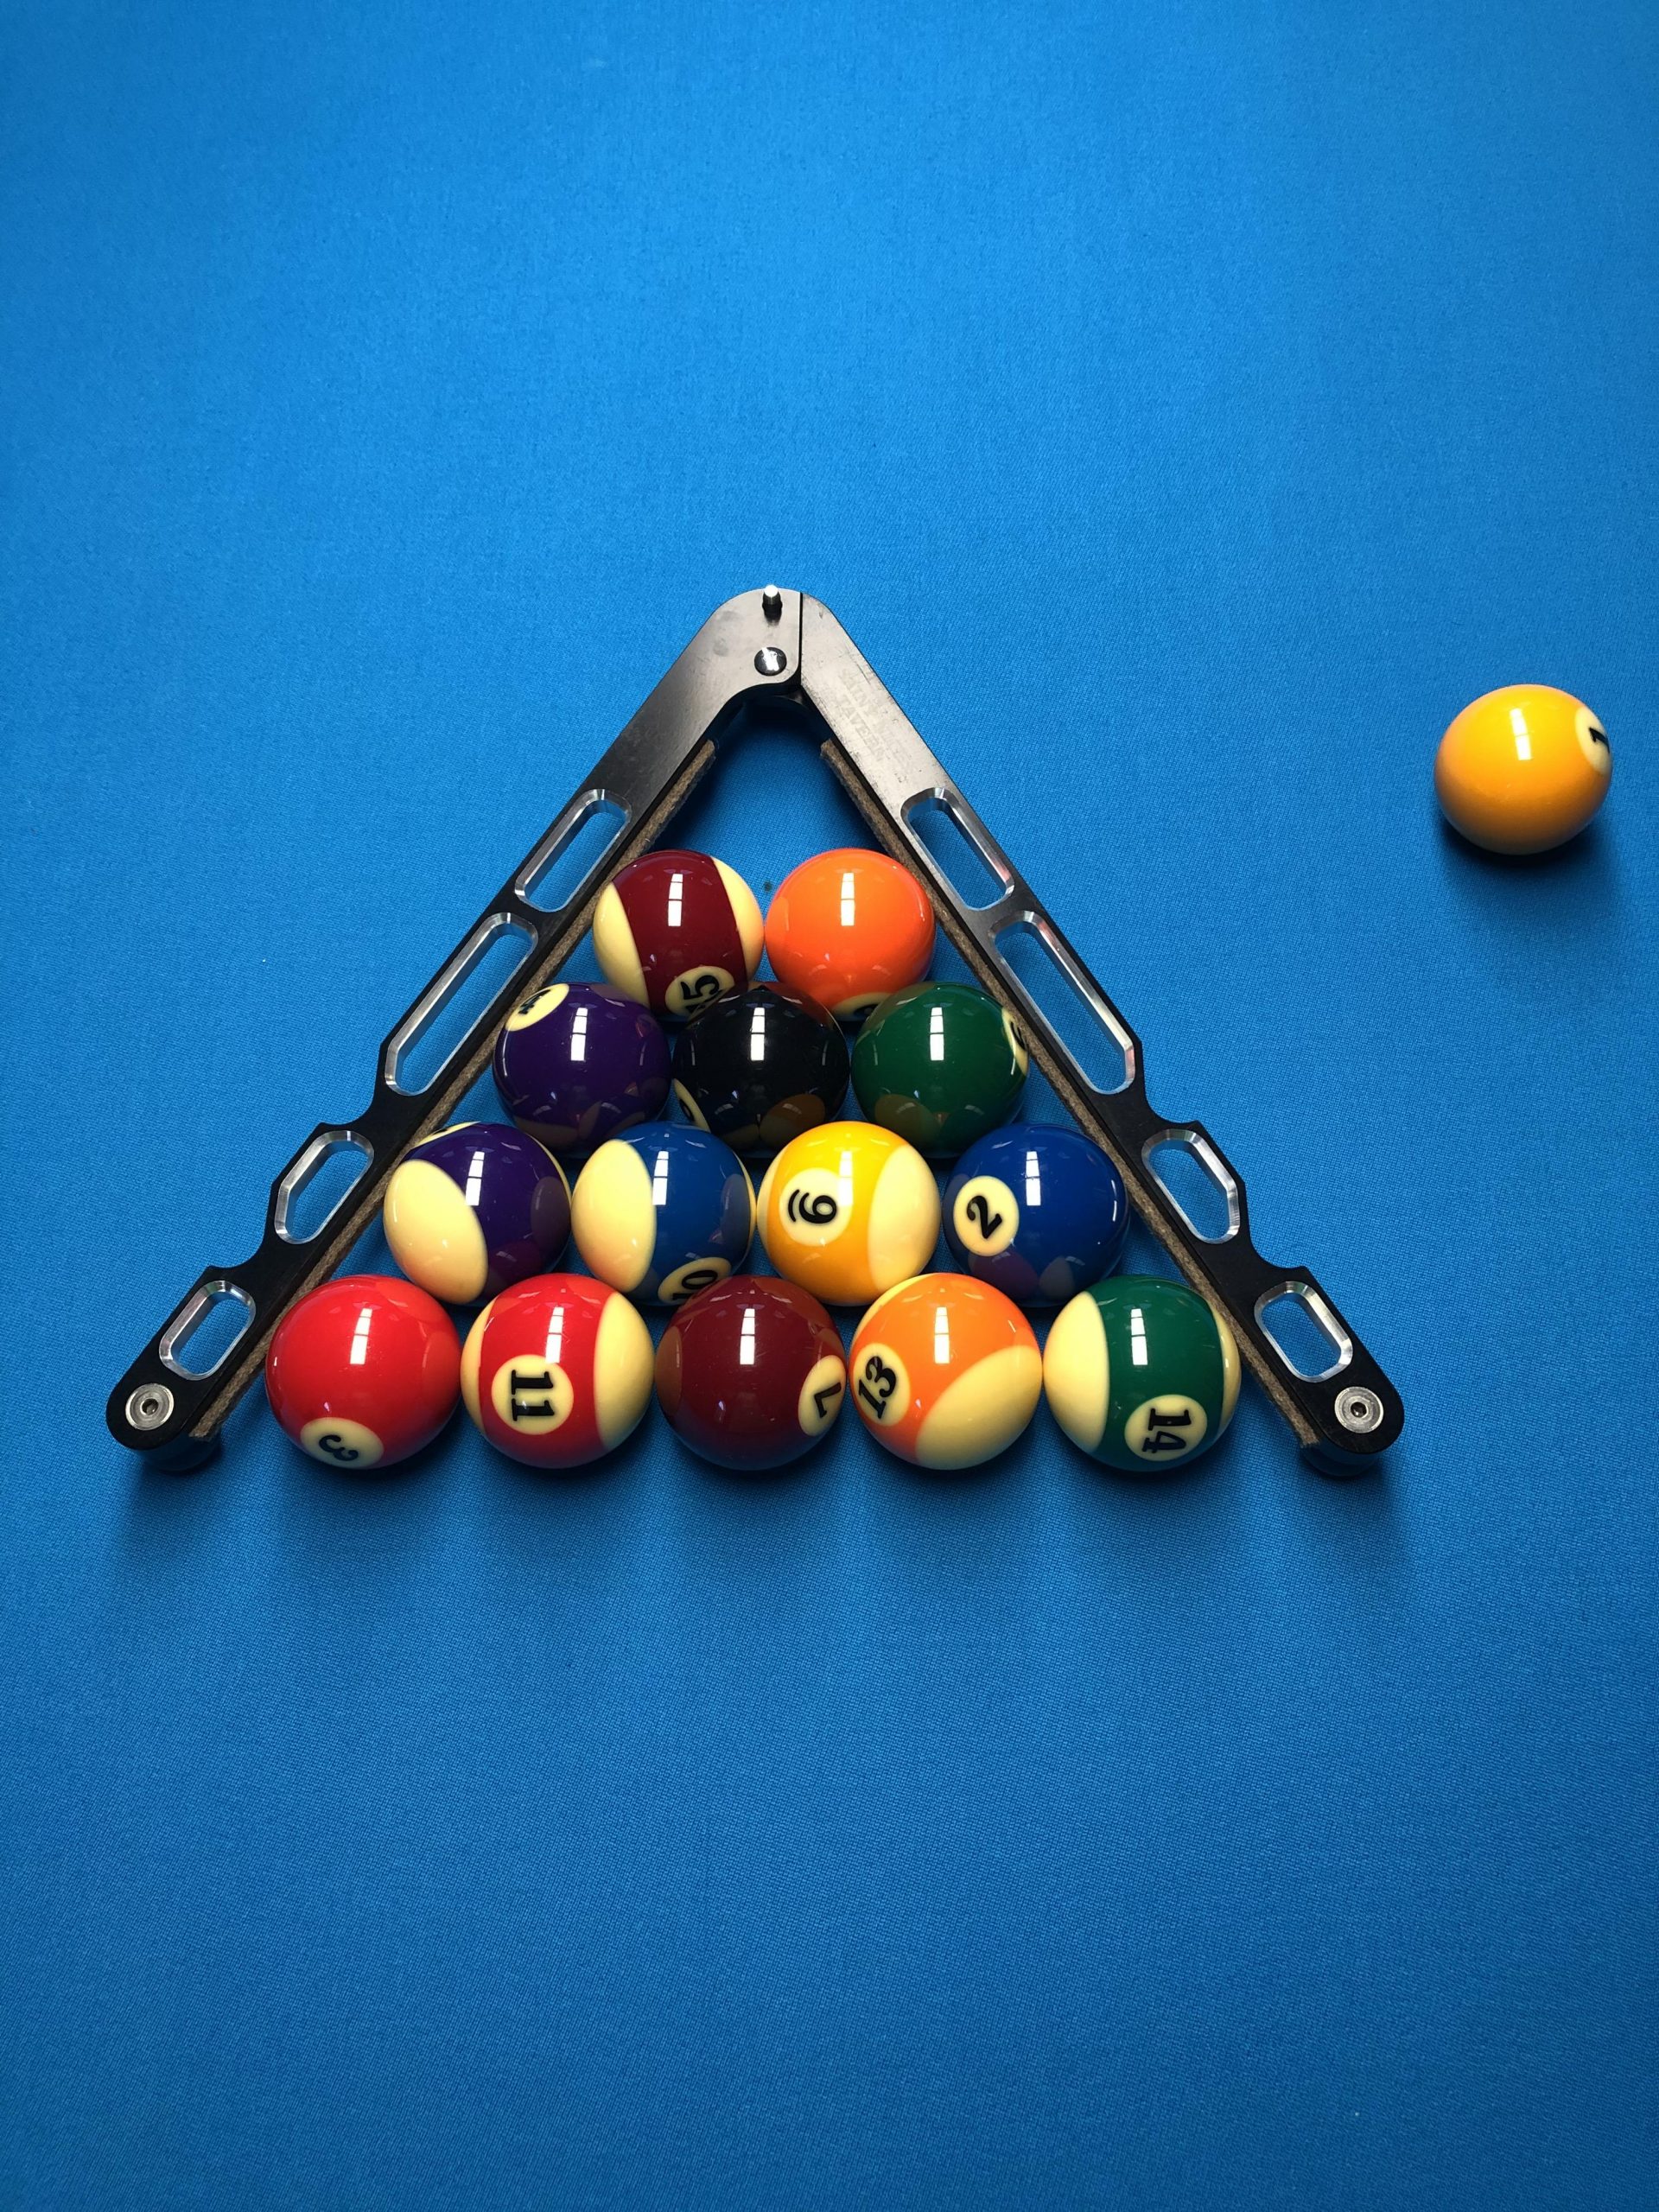 The Best Way to Rack An 8-Ball Rack (in my opinion). : r/billiards